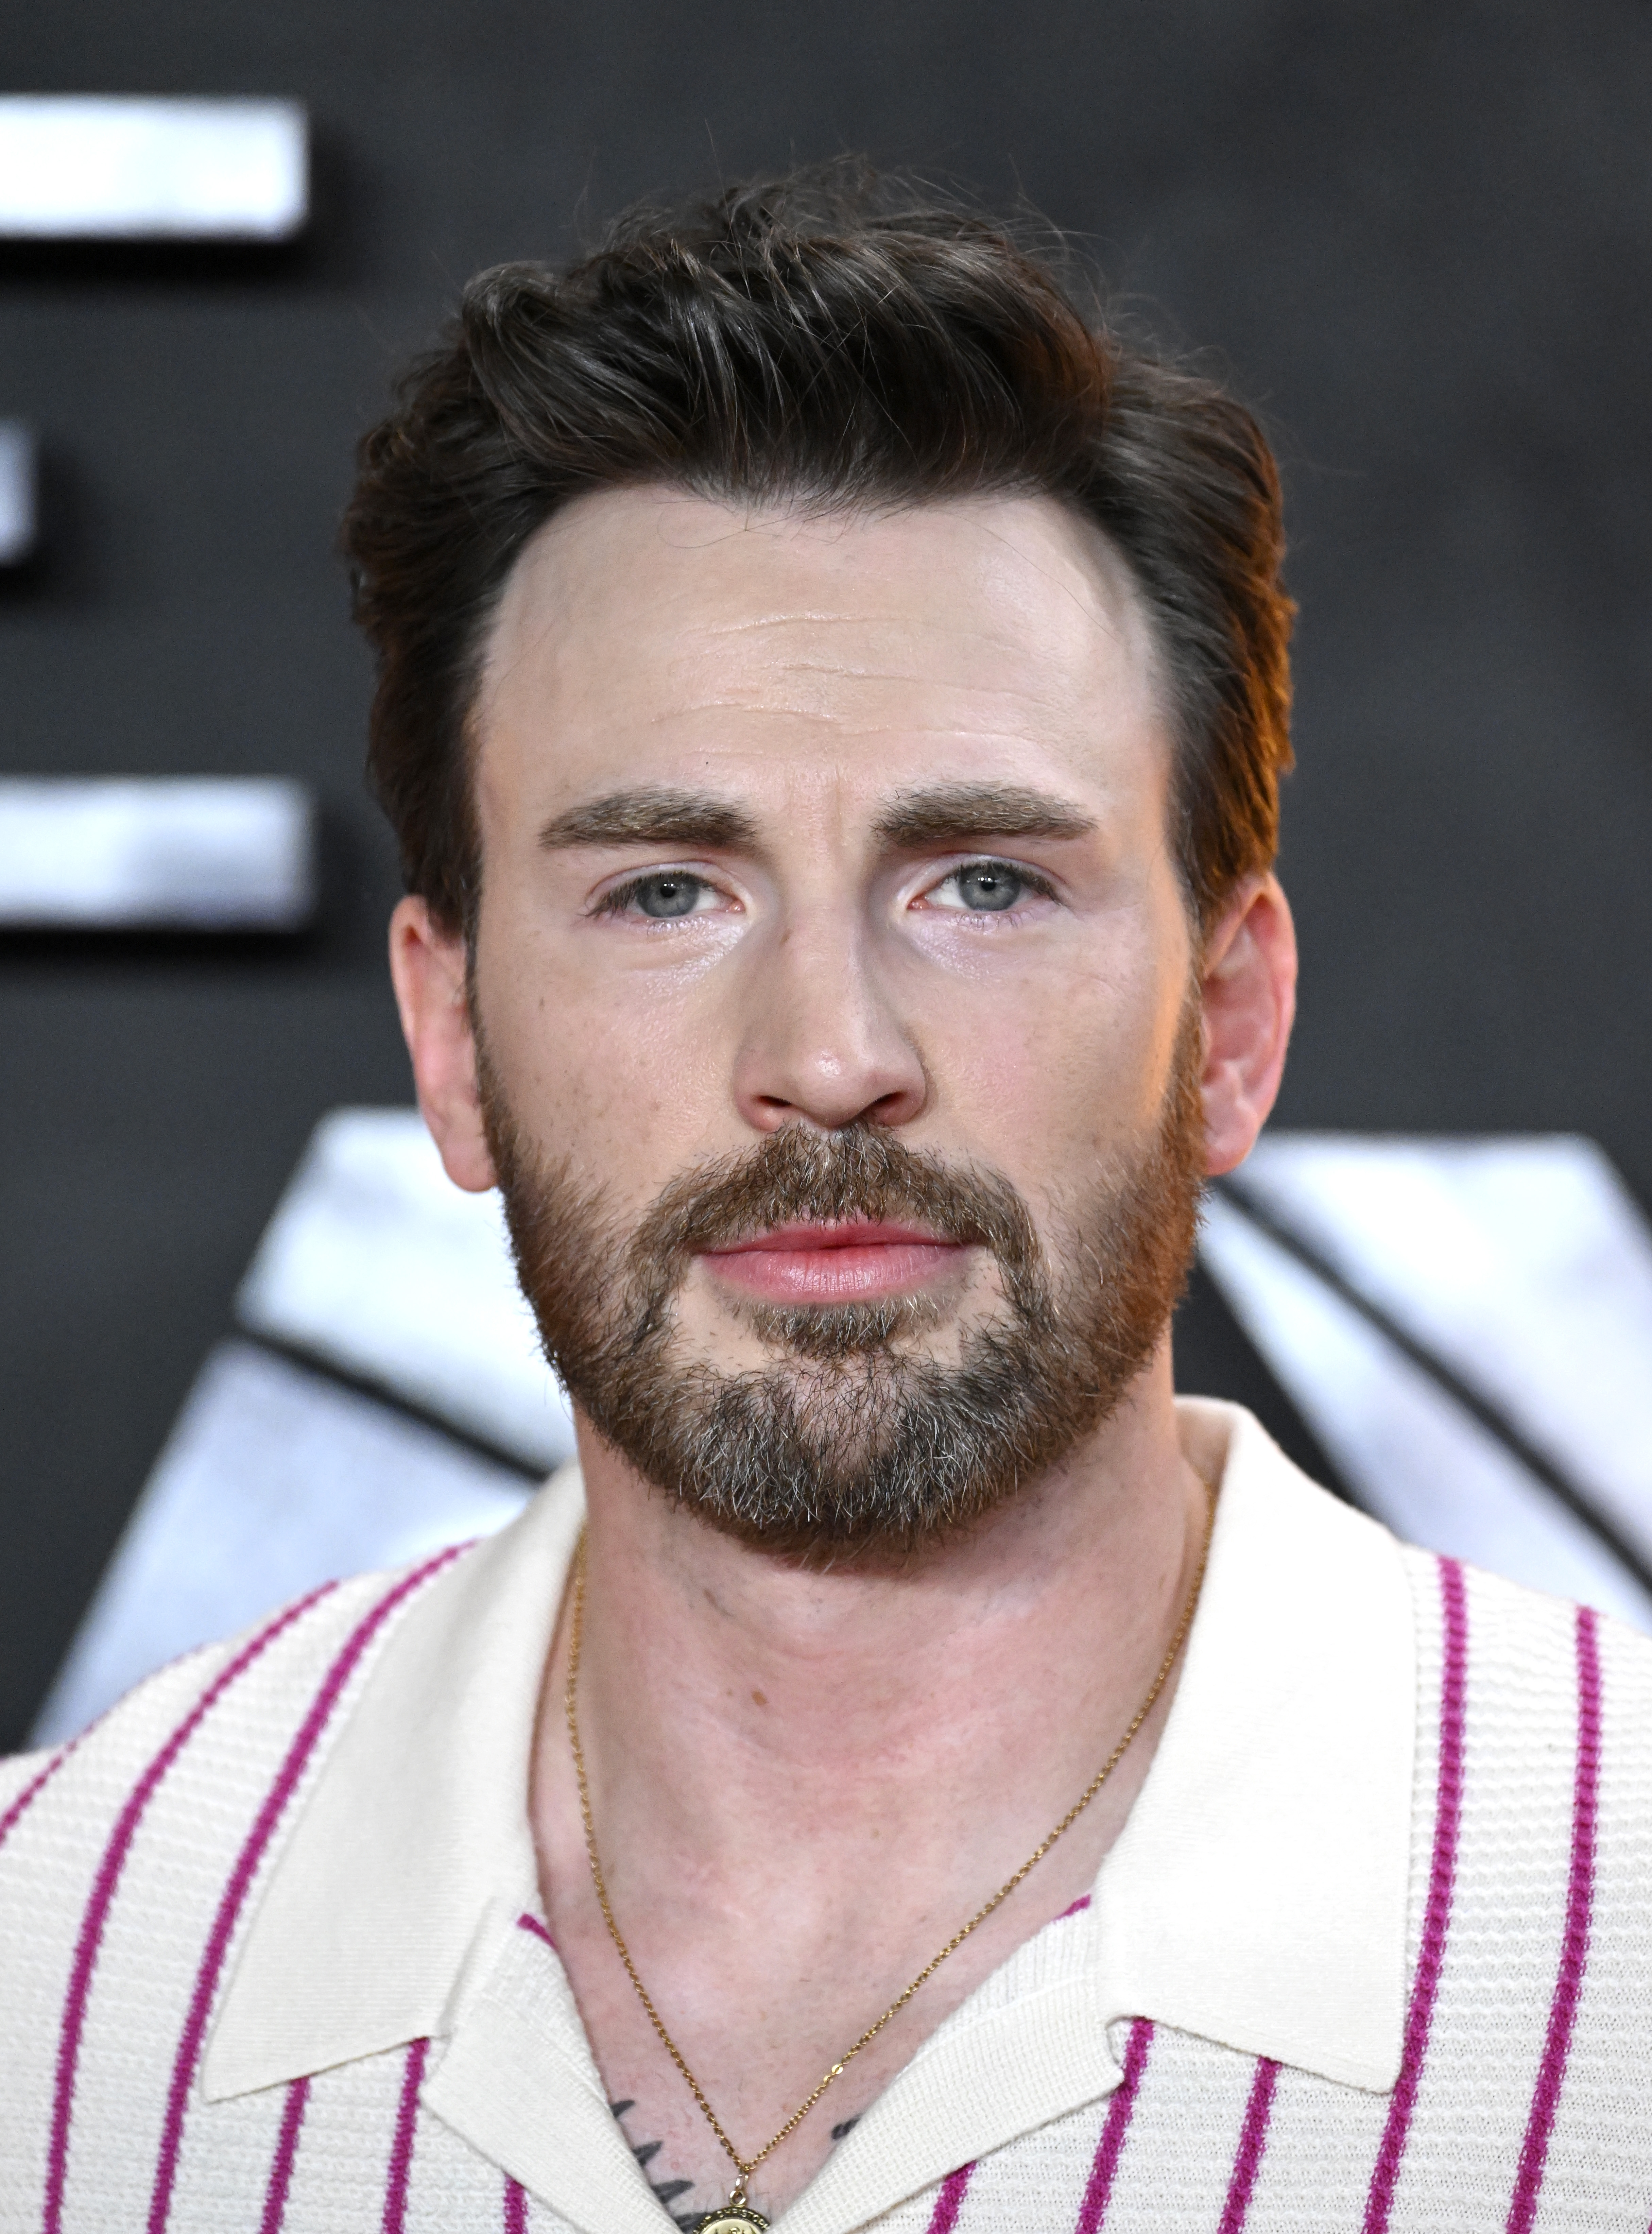 Chris Evans at the special screening of "The Gray Man" at BFI Southbank on July 19, 2022 in London, England | Source: Getty Images